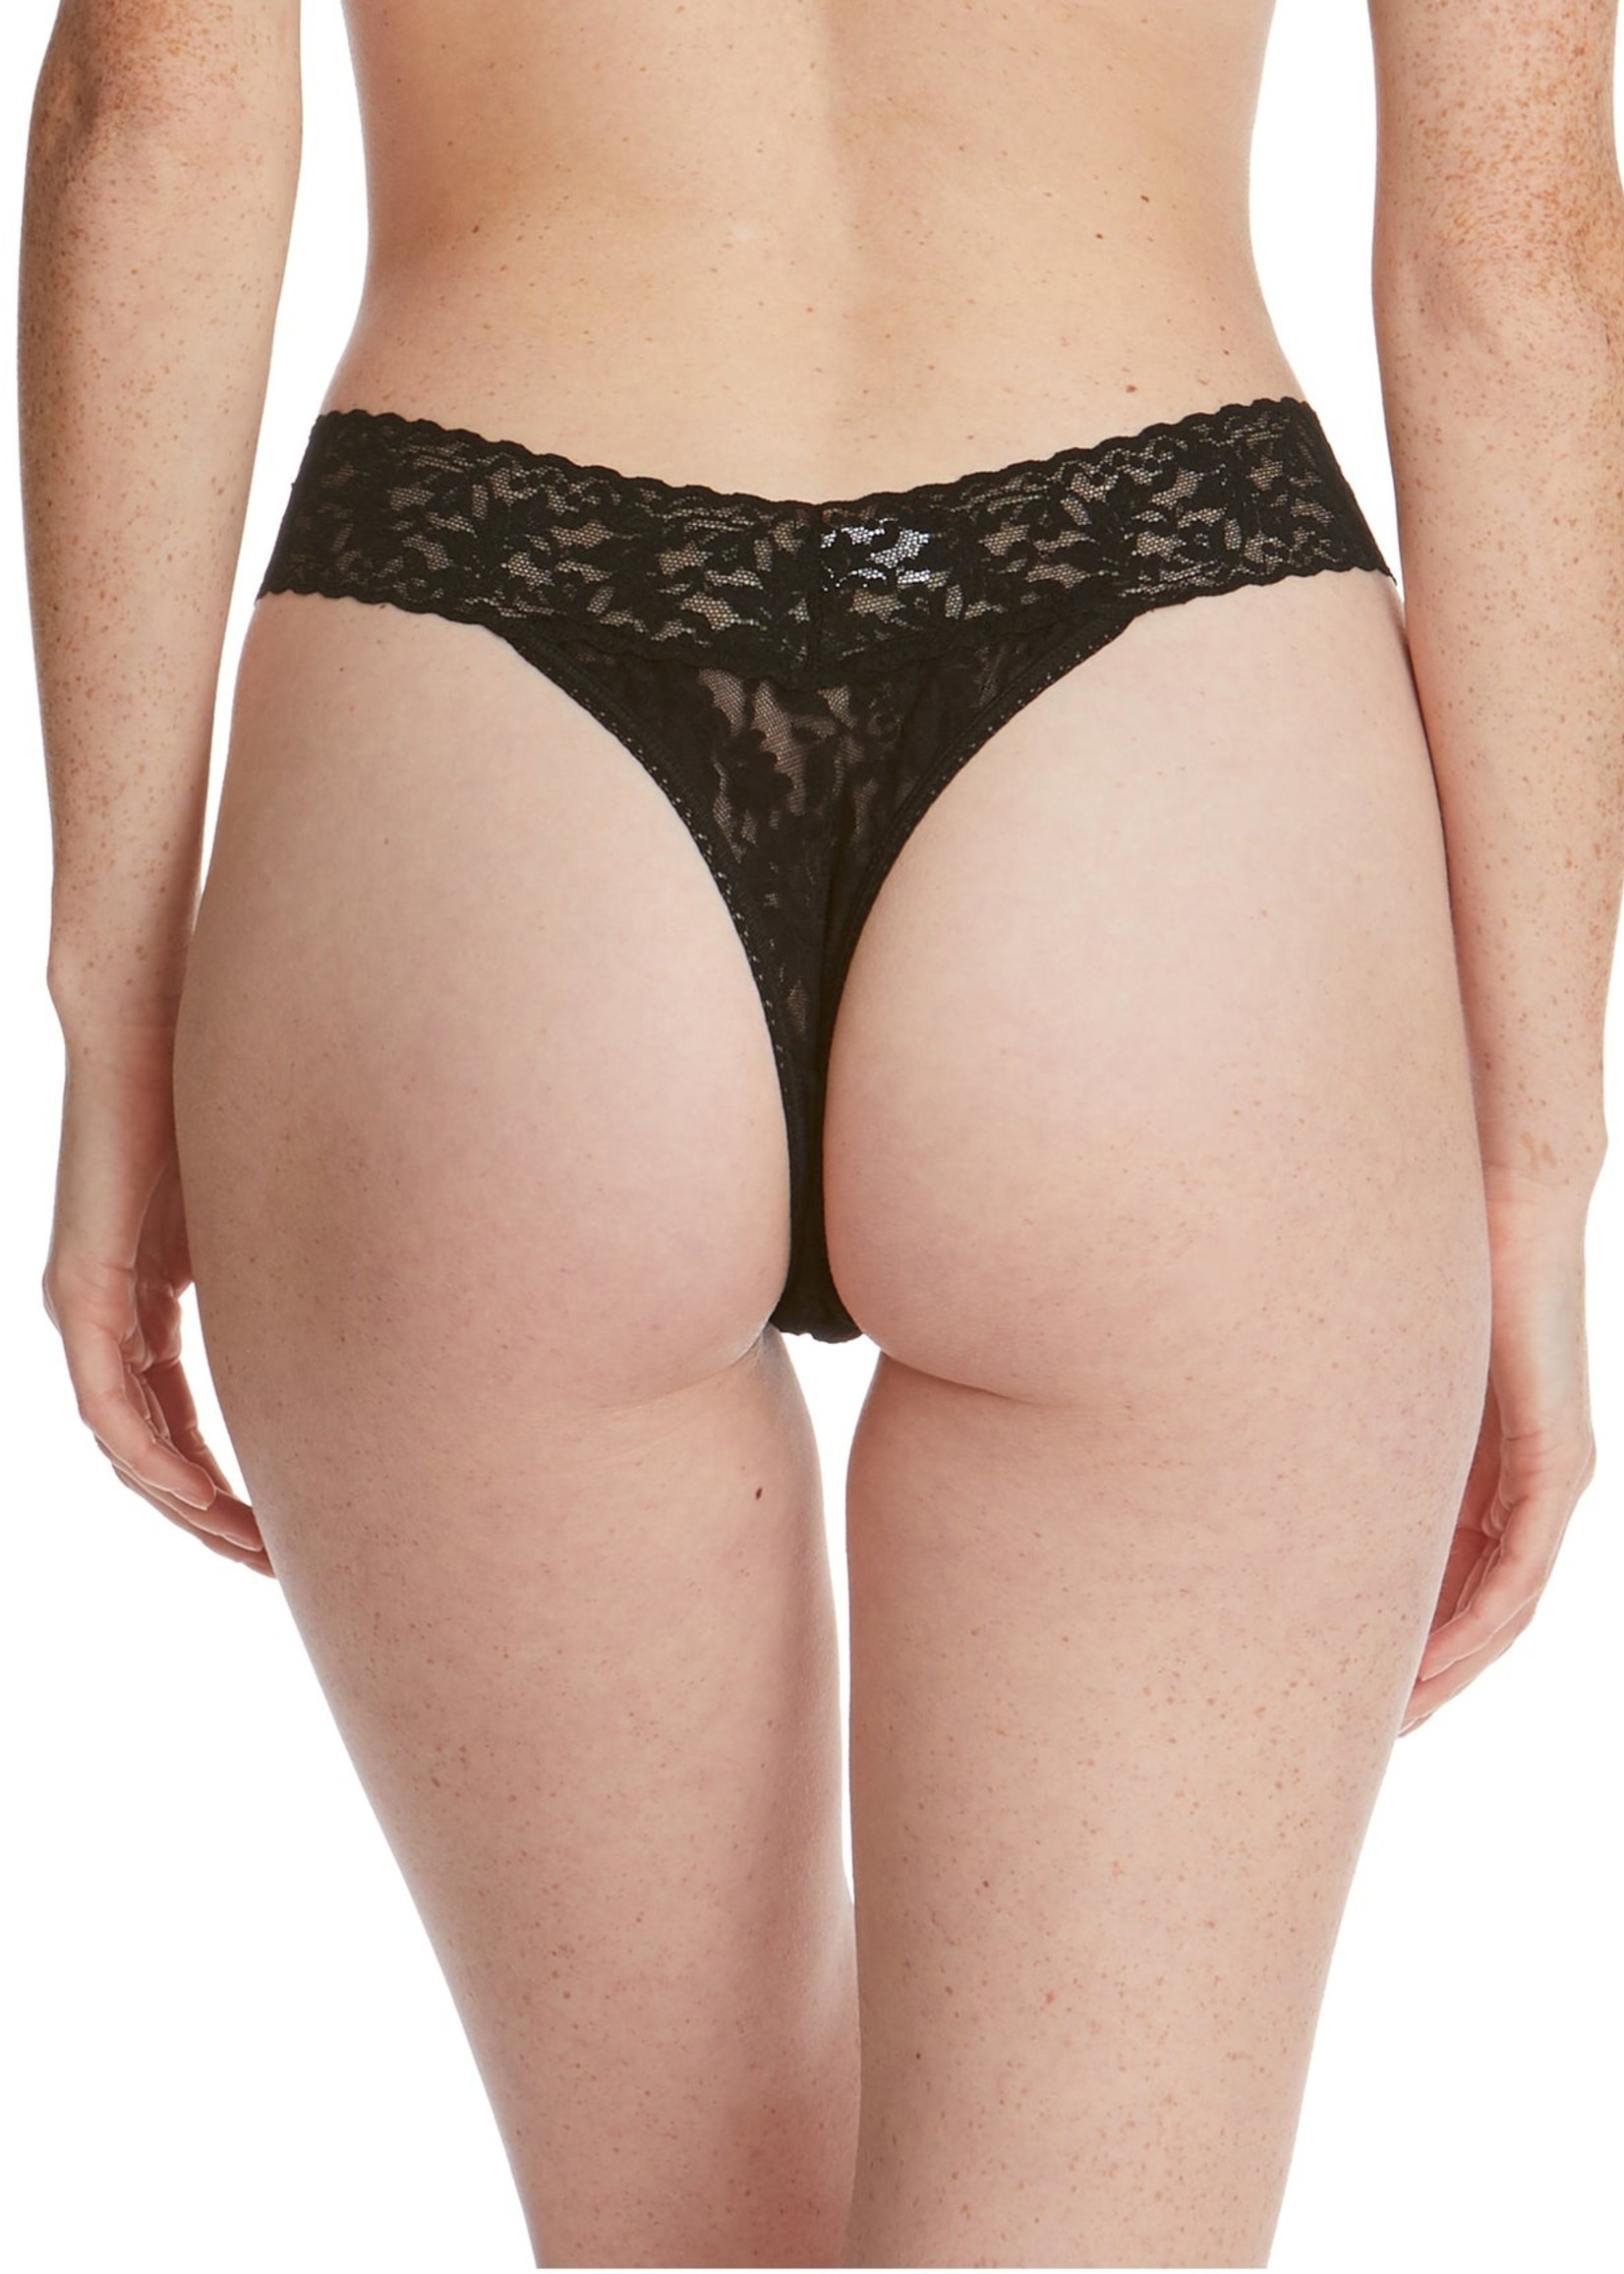 Hanky Panky Signature Lace Low Rise Thong Reviews